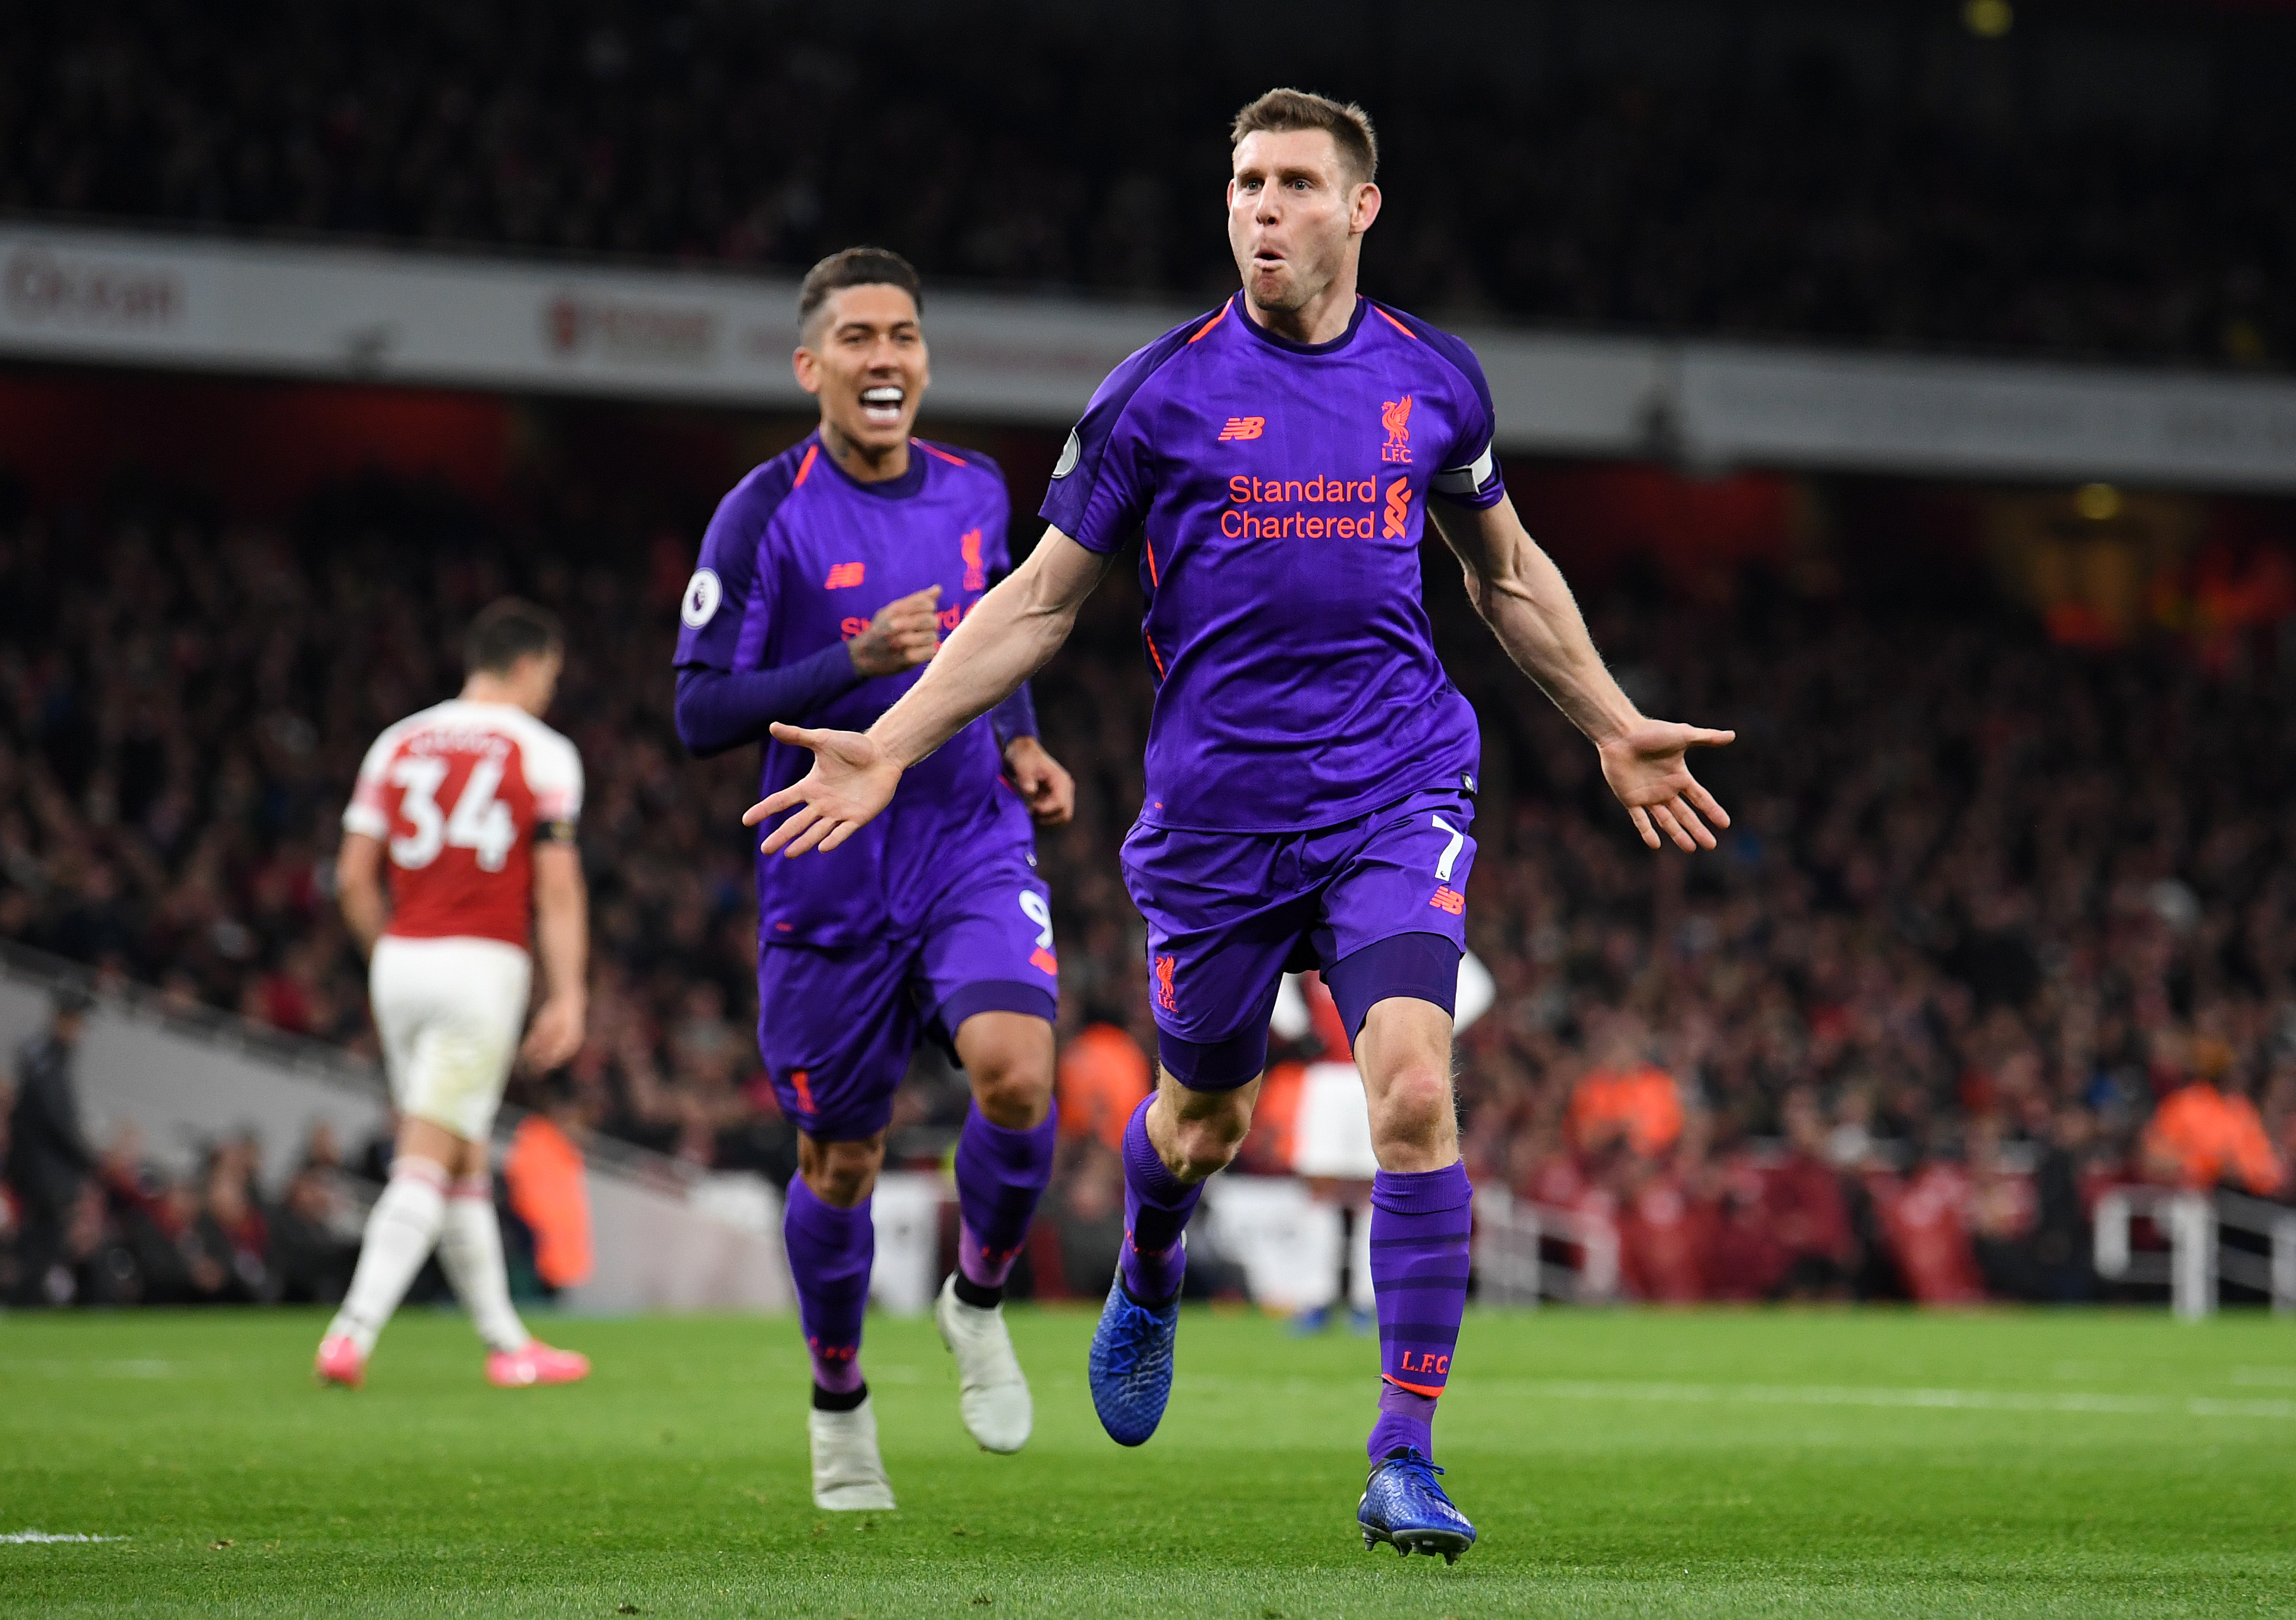 LONDON, ENGLAND - NOVEMBER 03:  James Milner of Liverpool celebrates after he scores his sides first goal during the Premier League match between Arsenal FC and Liverpool FC at Emirates Stadium on November 3, 2018 in London, United Kingdom.  (Photo by Michael Regan/Getty Images)